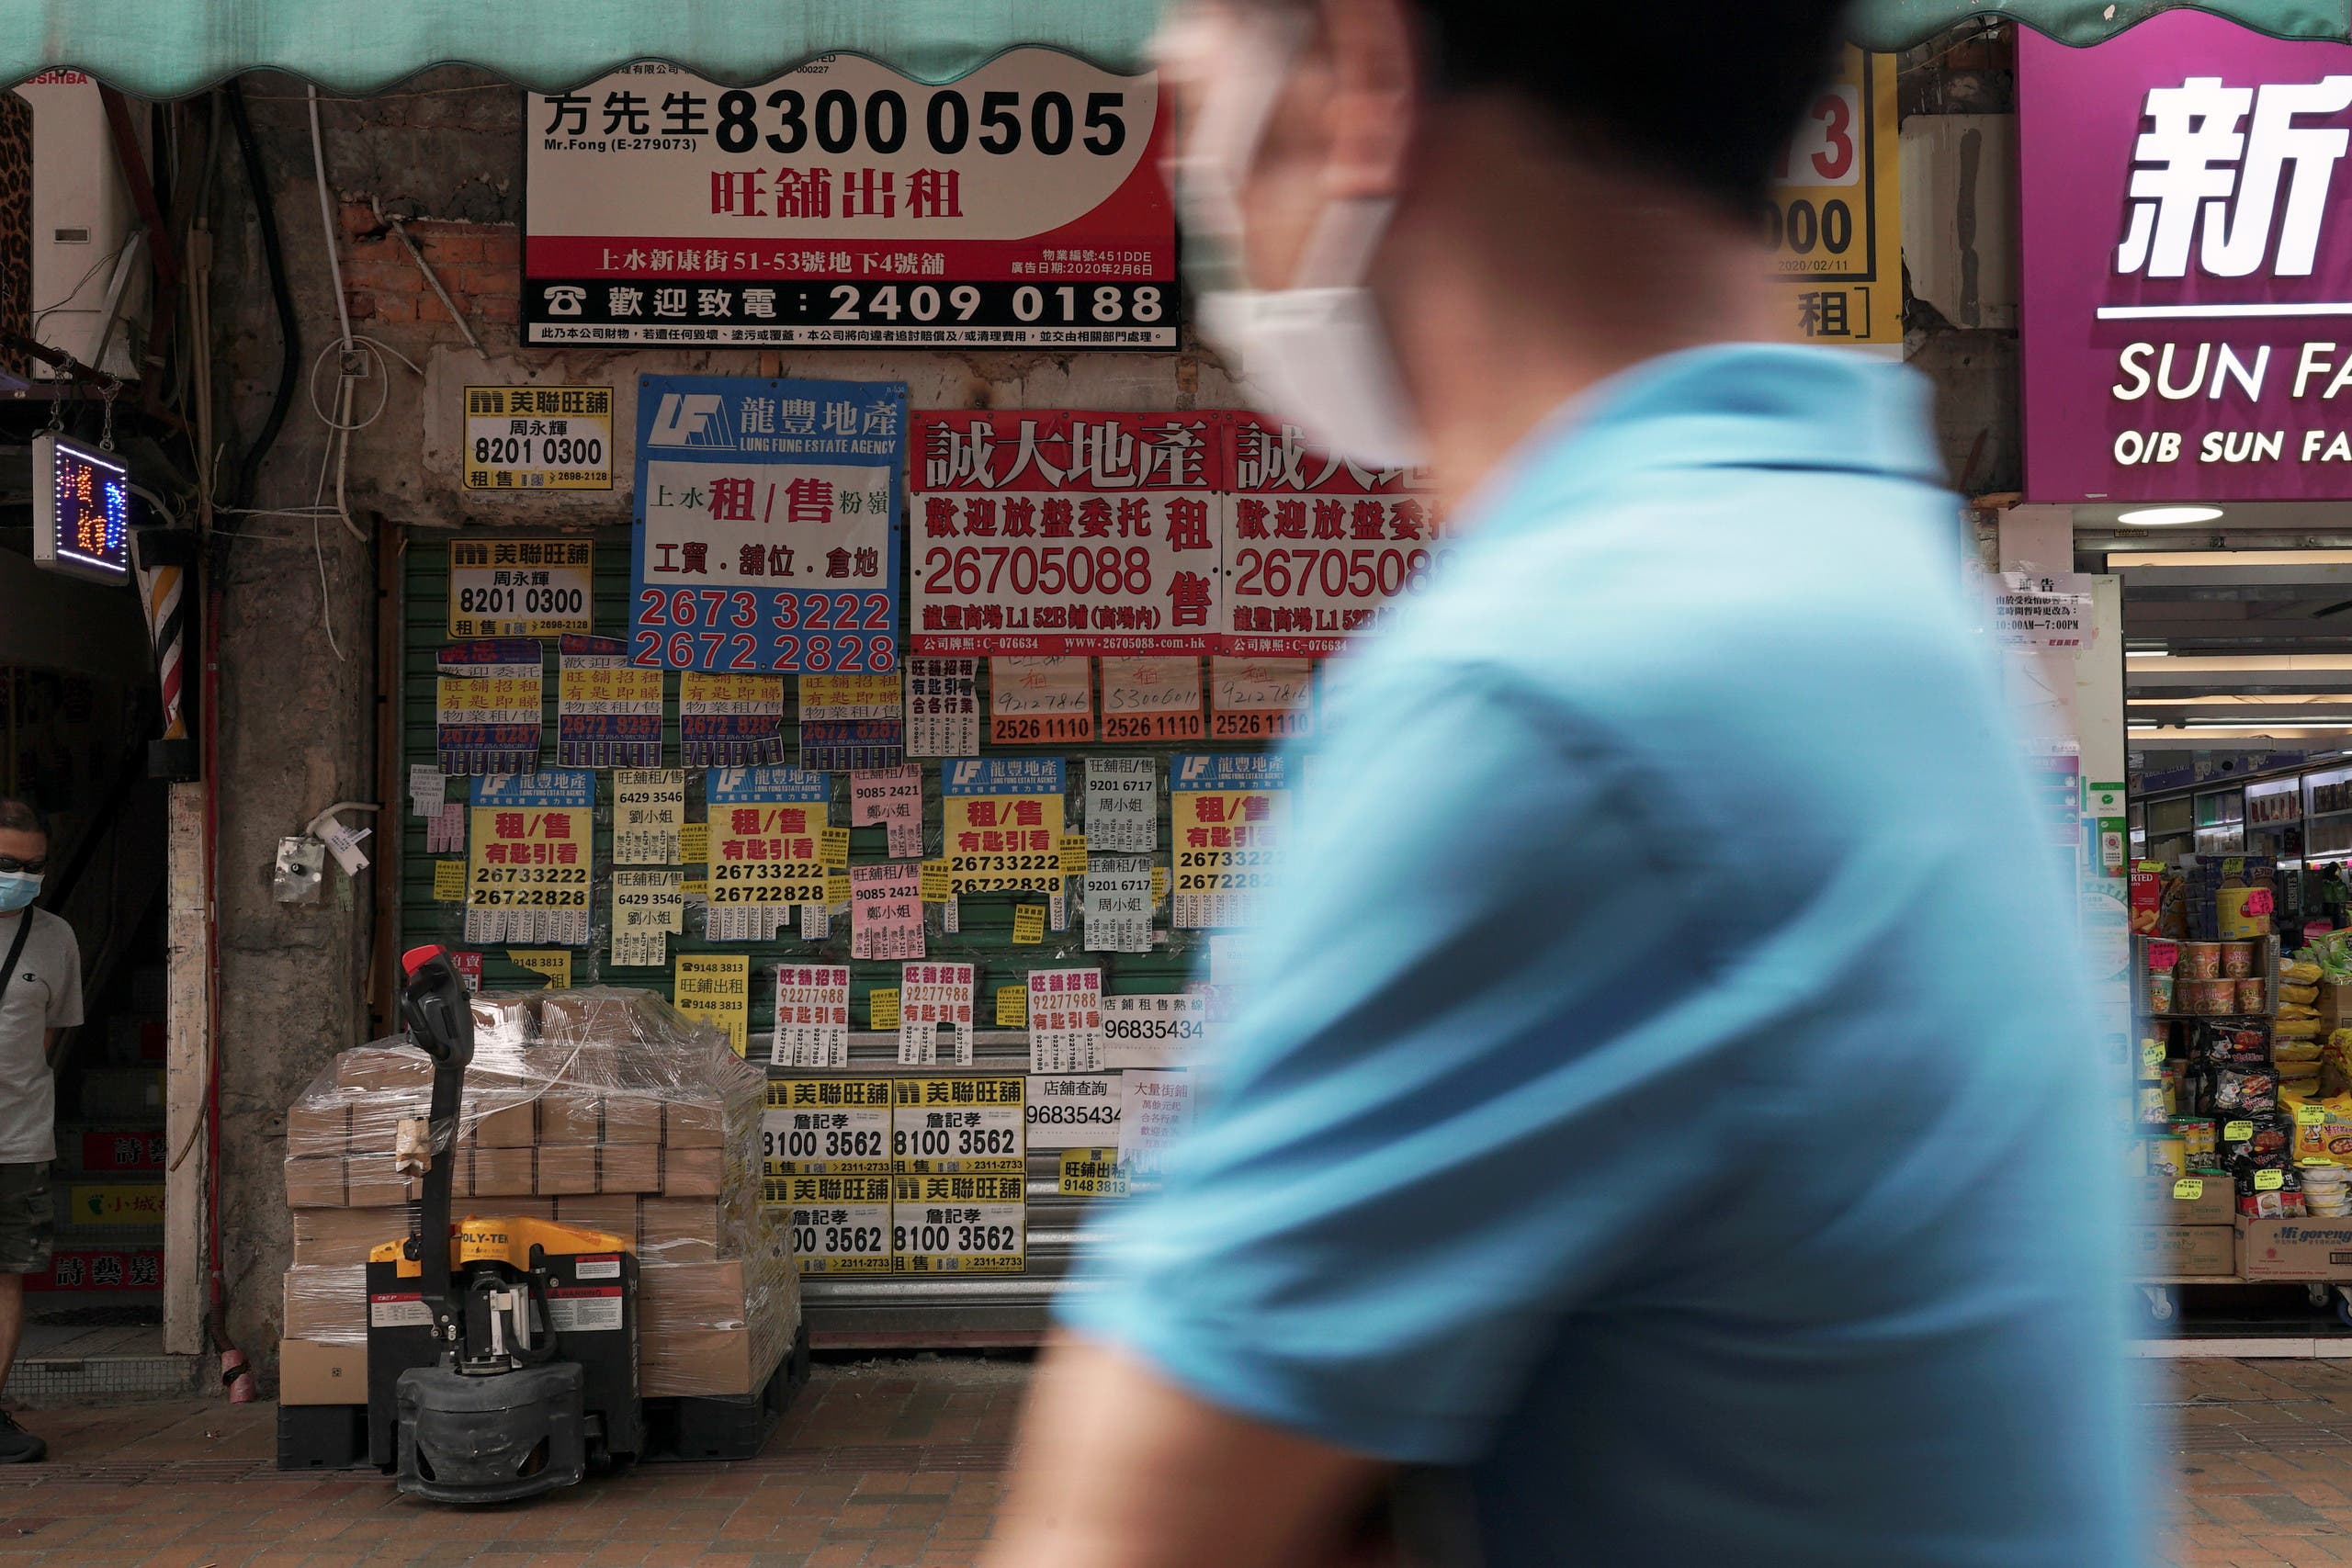 A man wearing a face mask walks past a shuttered shop space covered in rental advertisements, after the border between Shenzhen and Hong Kong was shut due to the coronavirus disease (COVID-19) outbreak, in Hong Kong's northern town of Sheung Shui, China May 18, 2020. (Reuters)